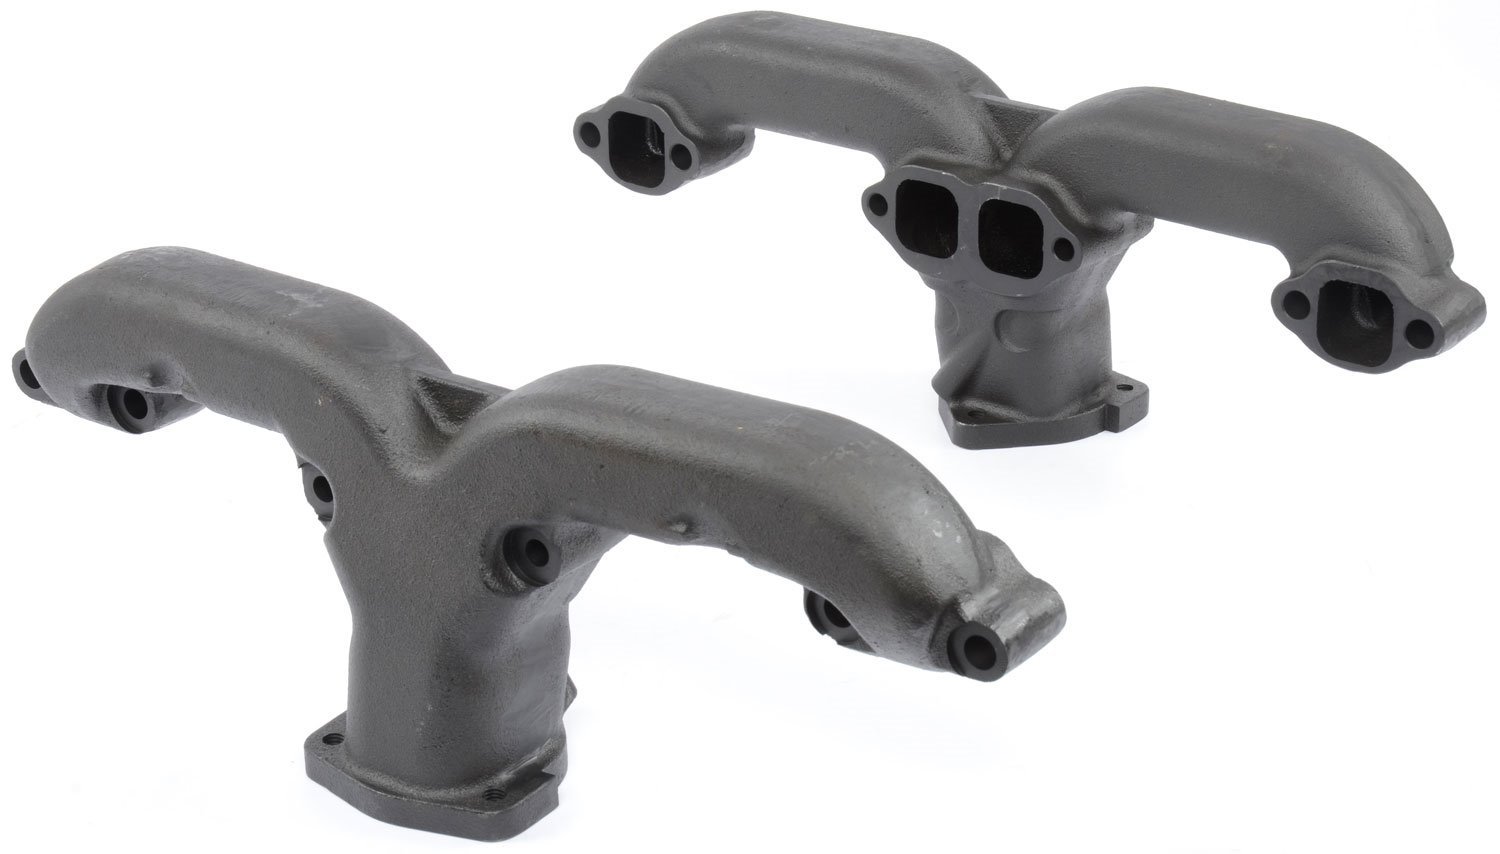 Cast Iron Rams Horn Style Exhaust Manifolds Fits Most Round/Square Port Small Block Chevy Stock Cylinder Heads